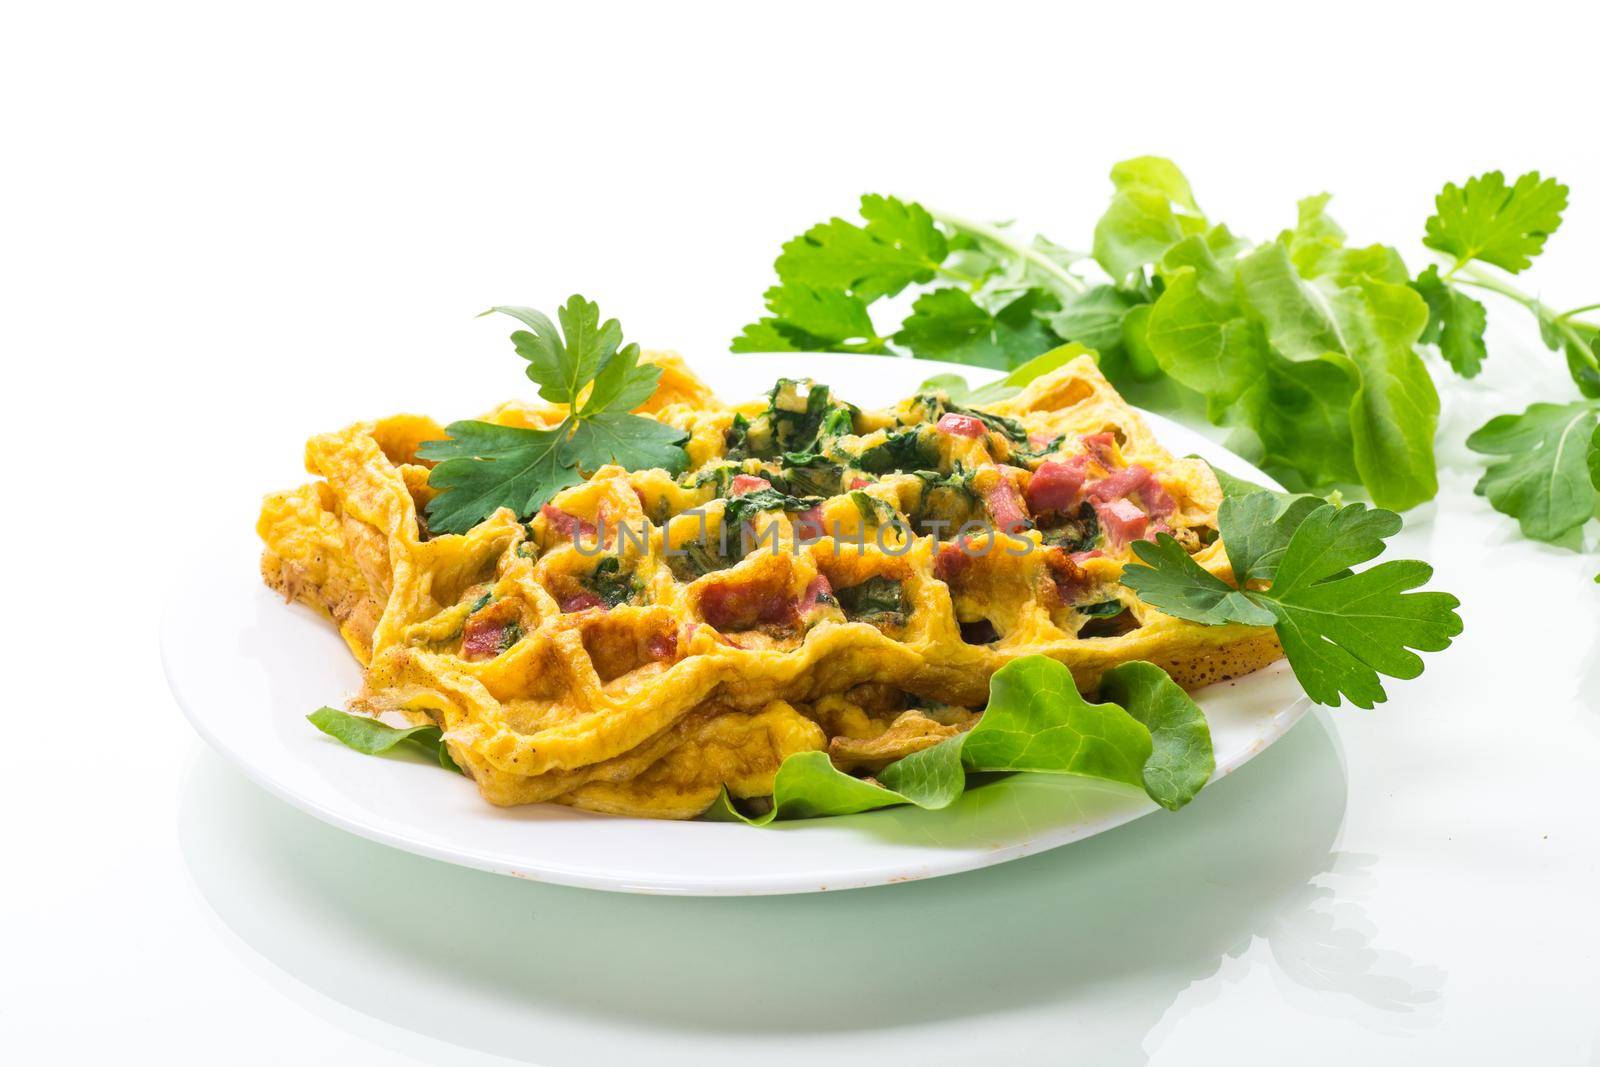 Egg omelet stuffed with greens and sausage fried in the form of waffles, isolated on white background